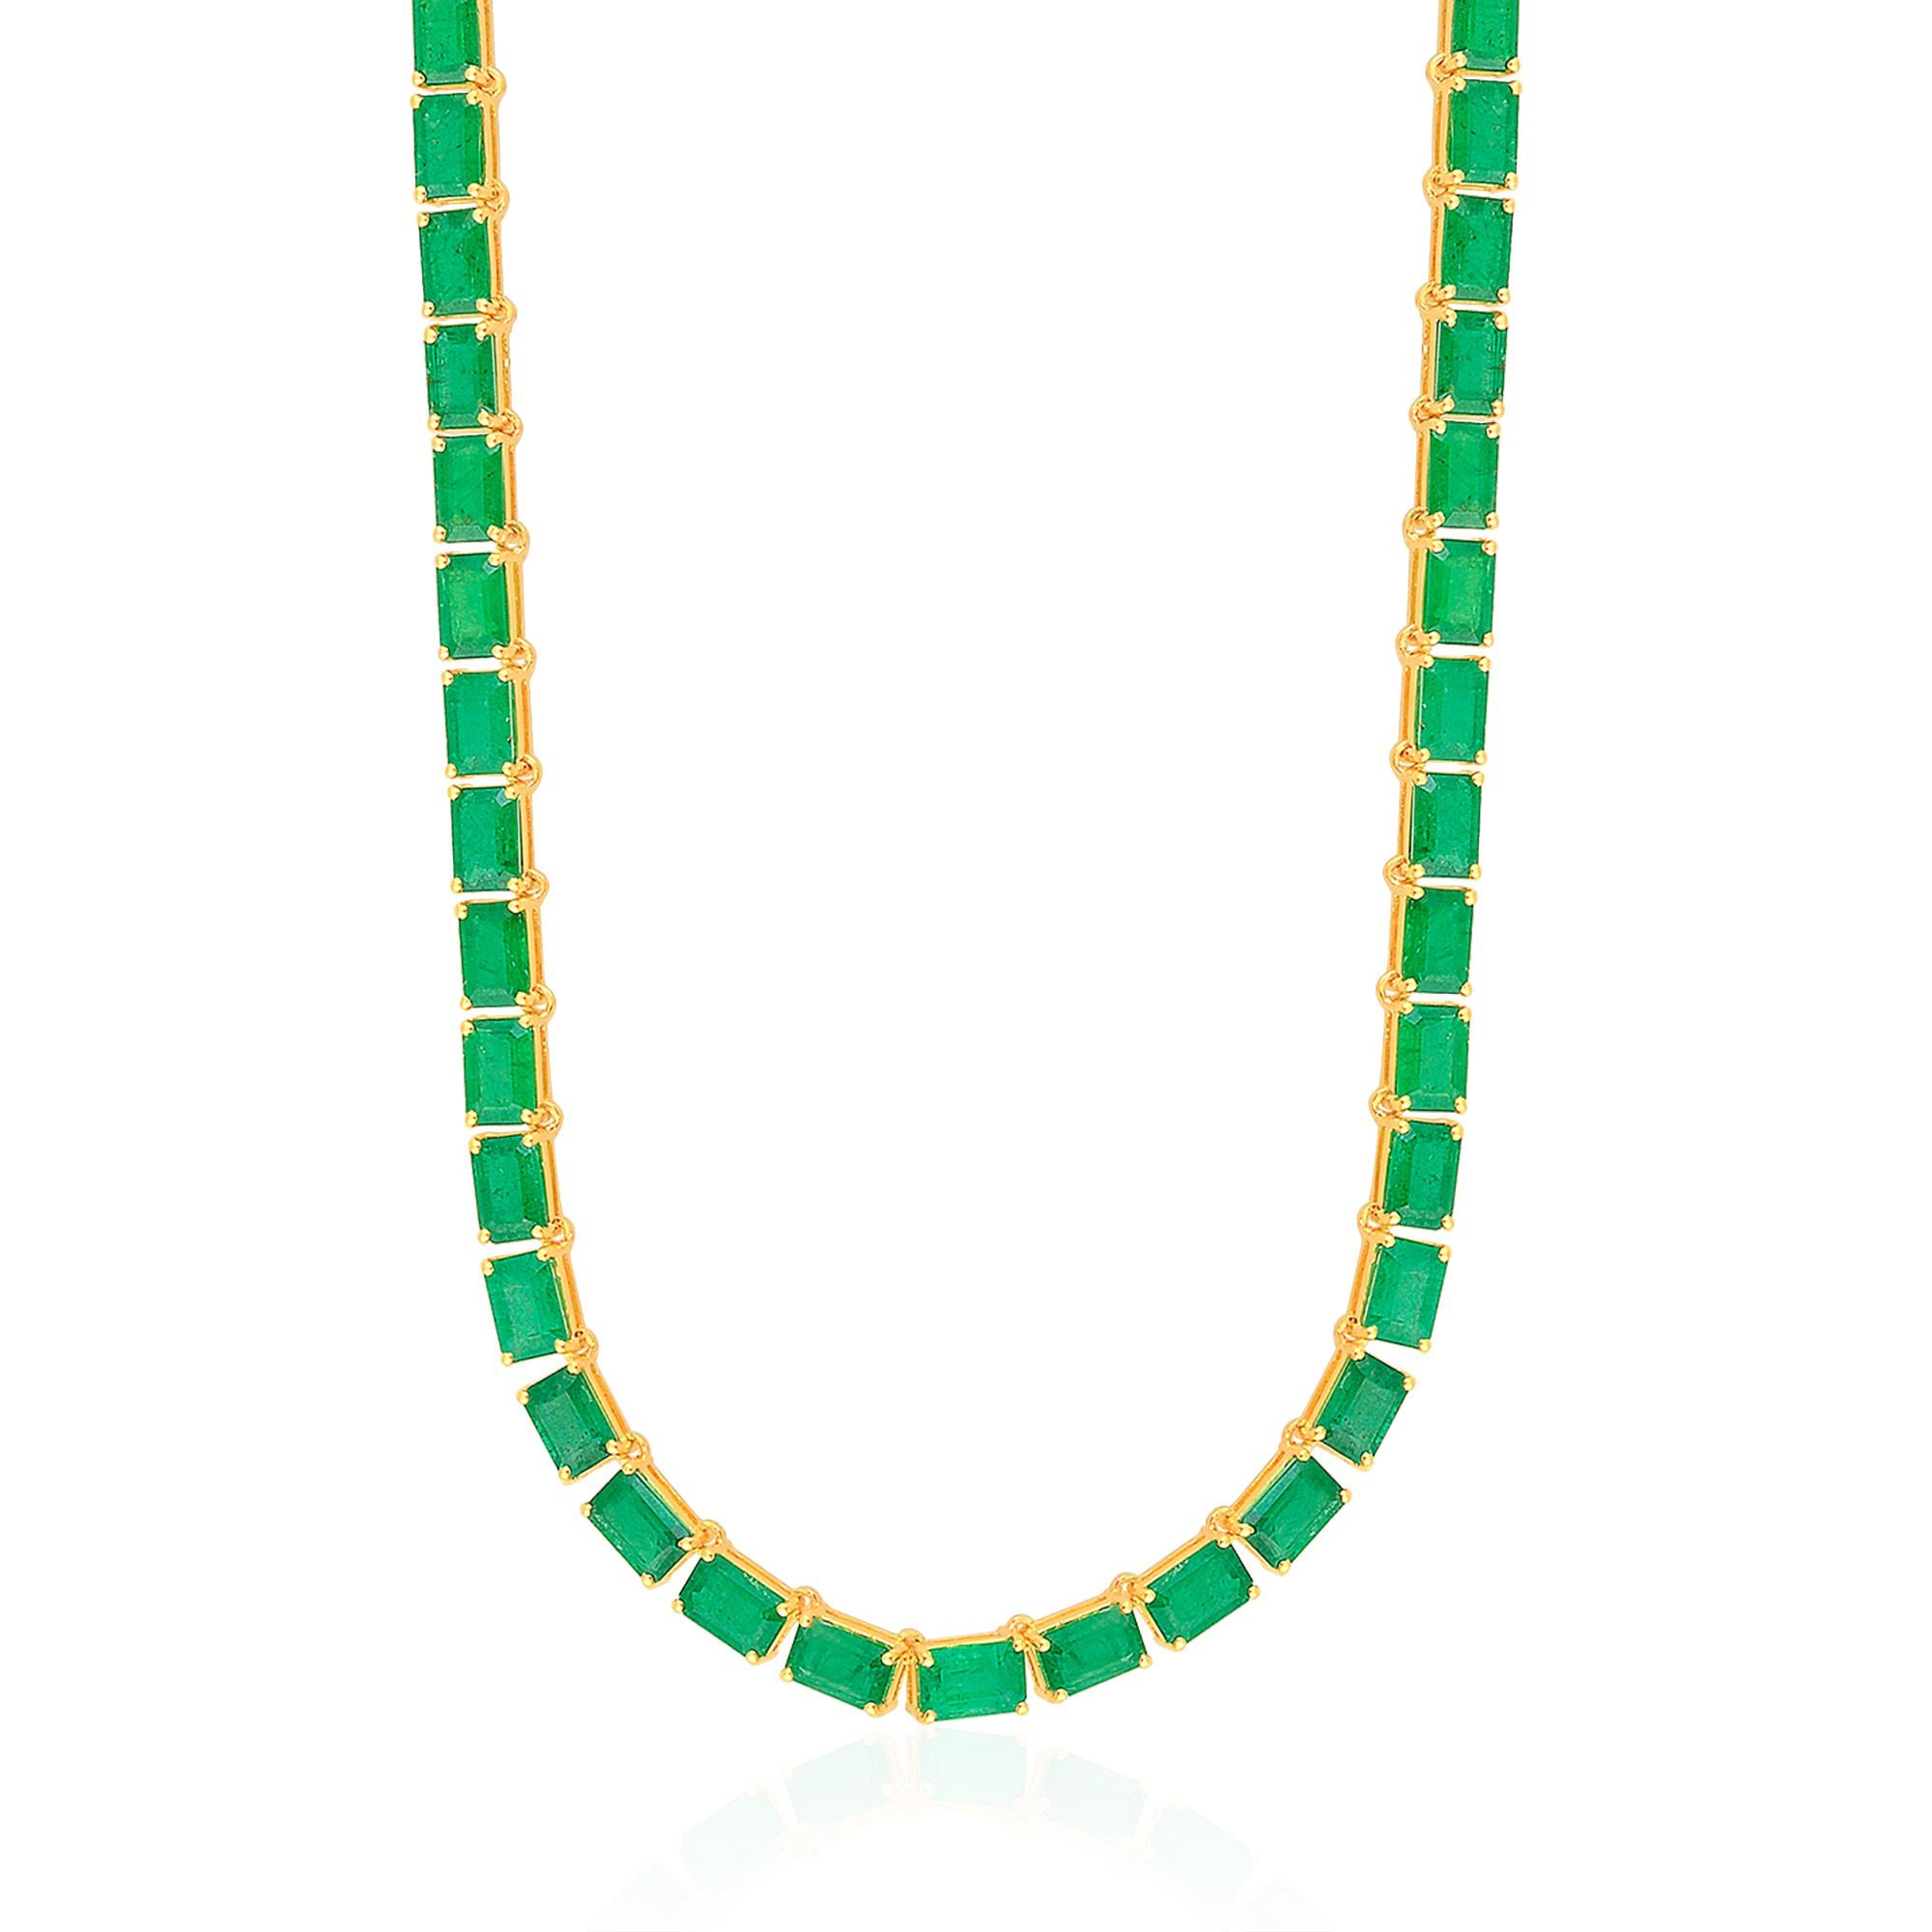 Crafted with meticulous attention to detail, this necklace showcases exquisite craftsmanship and a commitment to excellence. The 14k yellow gold setting provides a warm and luxurious backdrop for the emeralds, enhancing their color and creating a